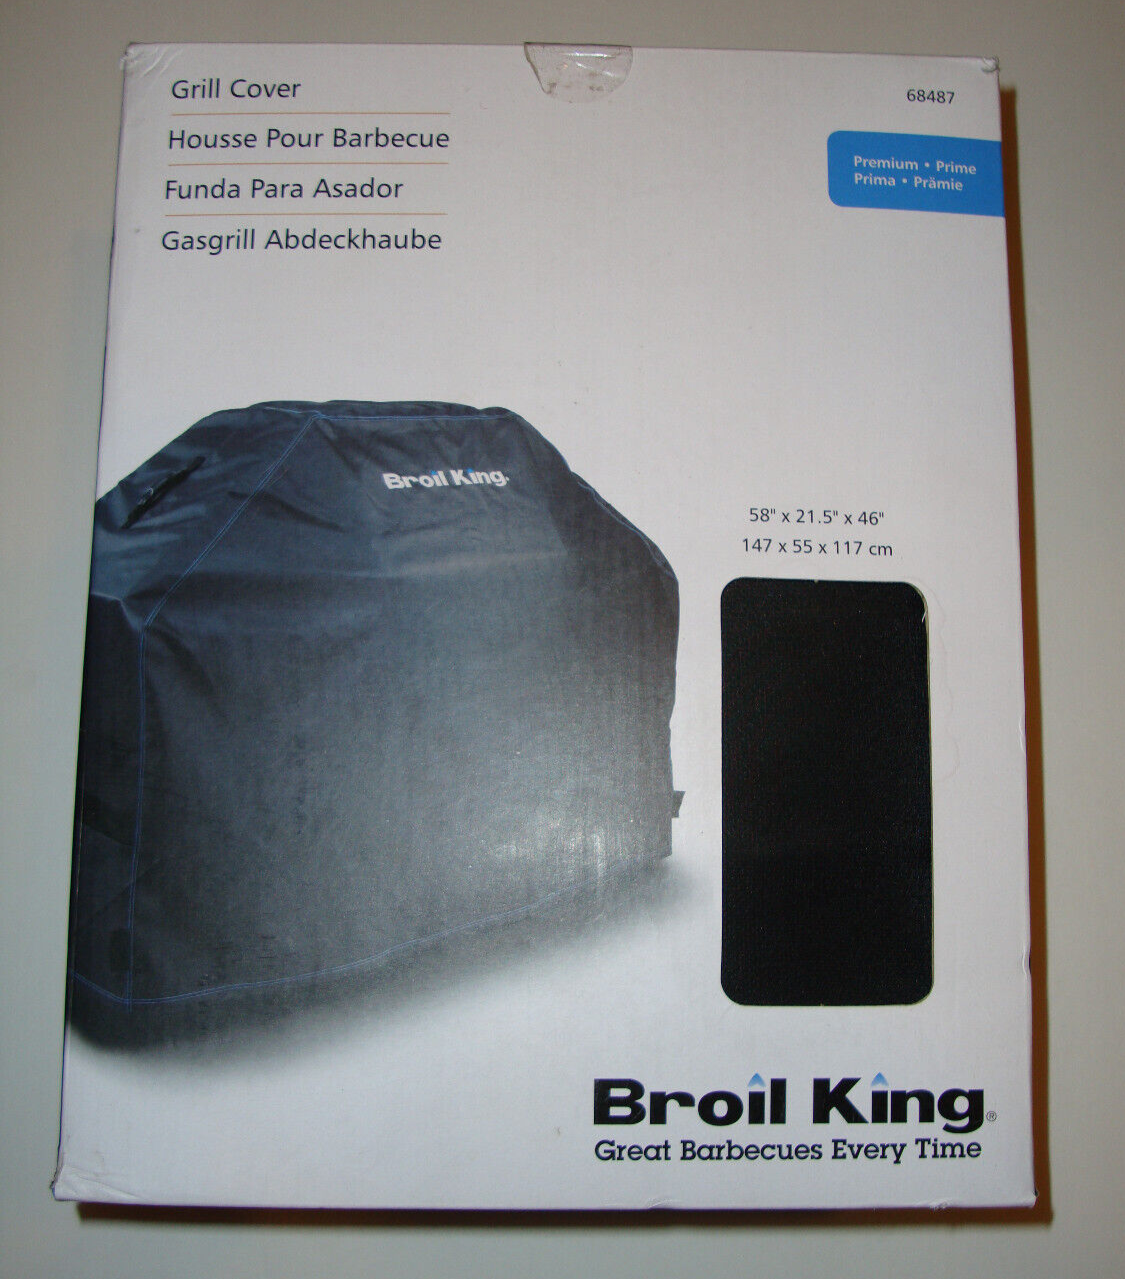 NEW NIB BROIL KING GRILL COVER 58" X 21.5" X 46" POLY-LINED 